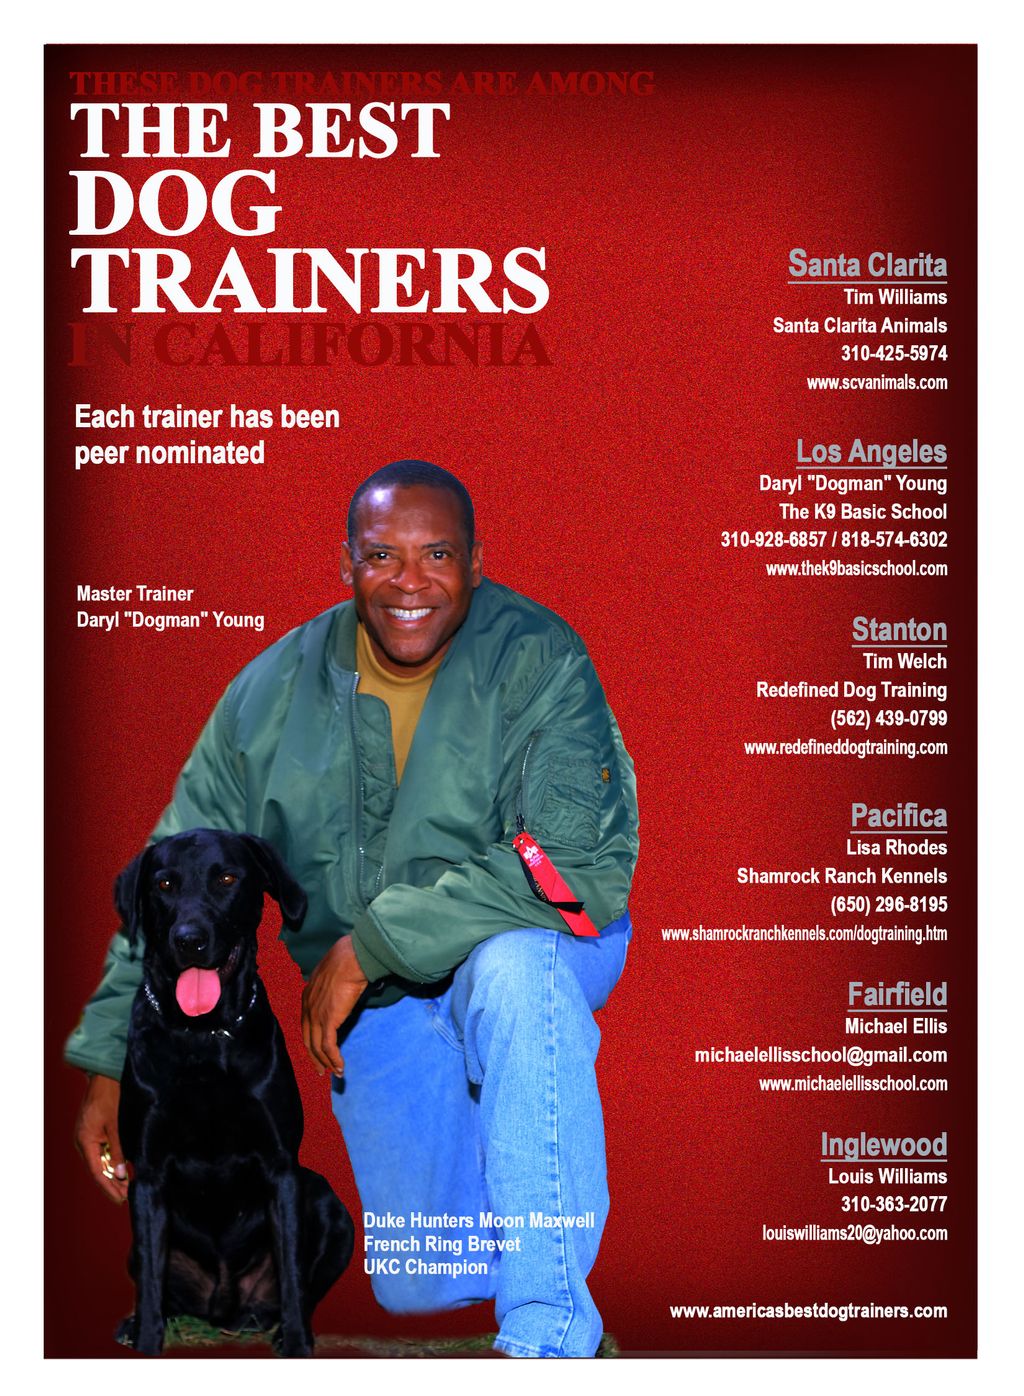 America's Best Dog Trainers